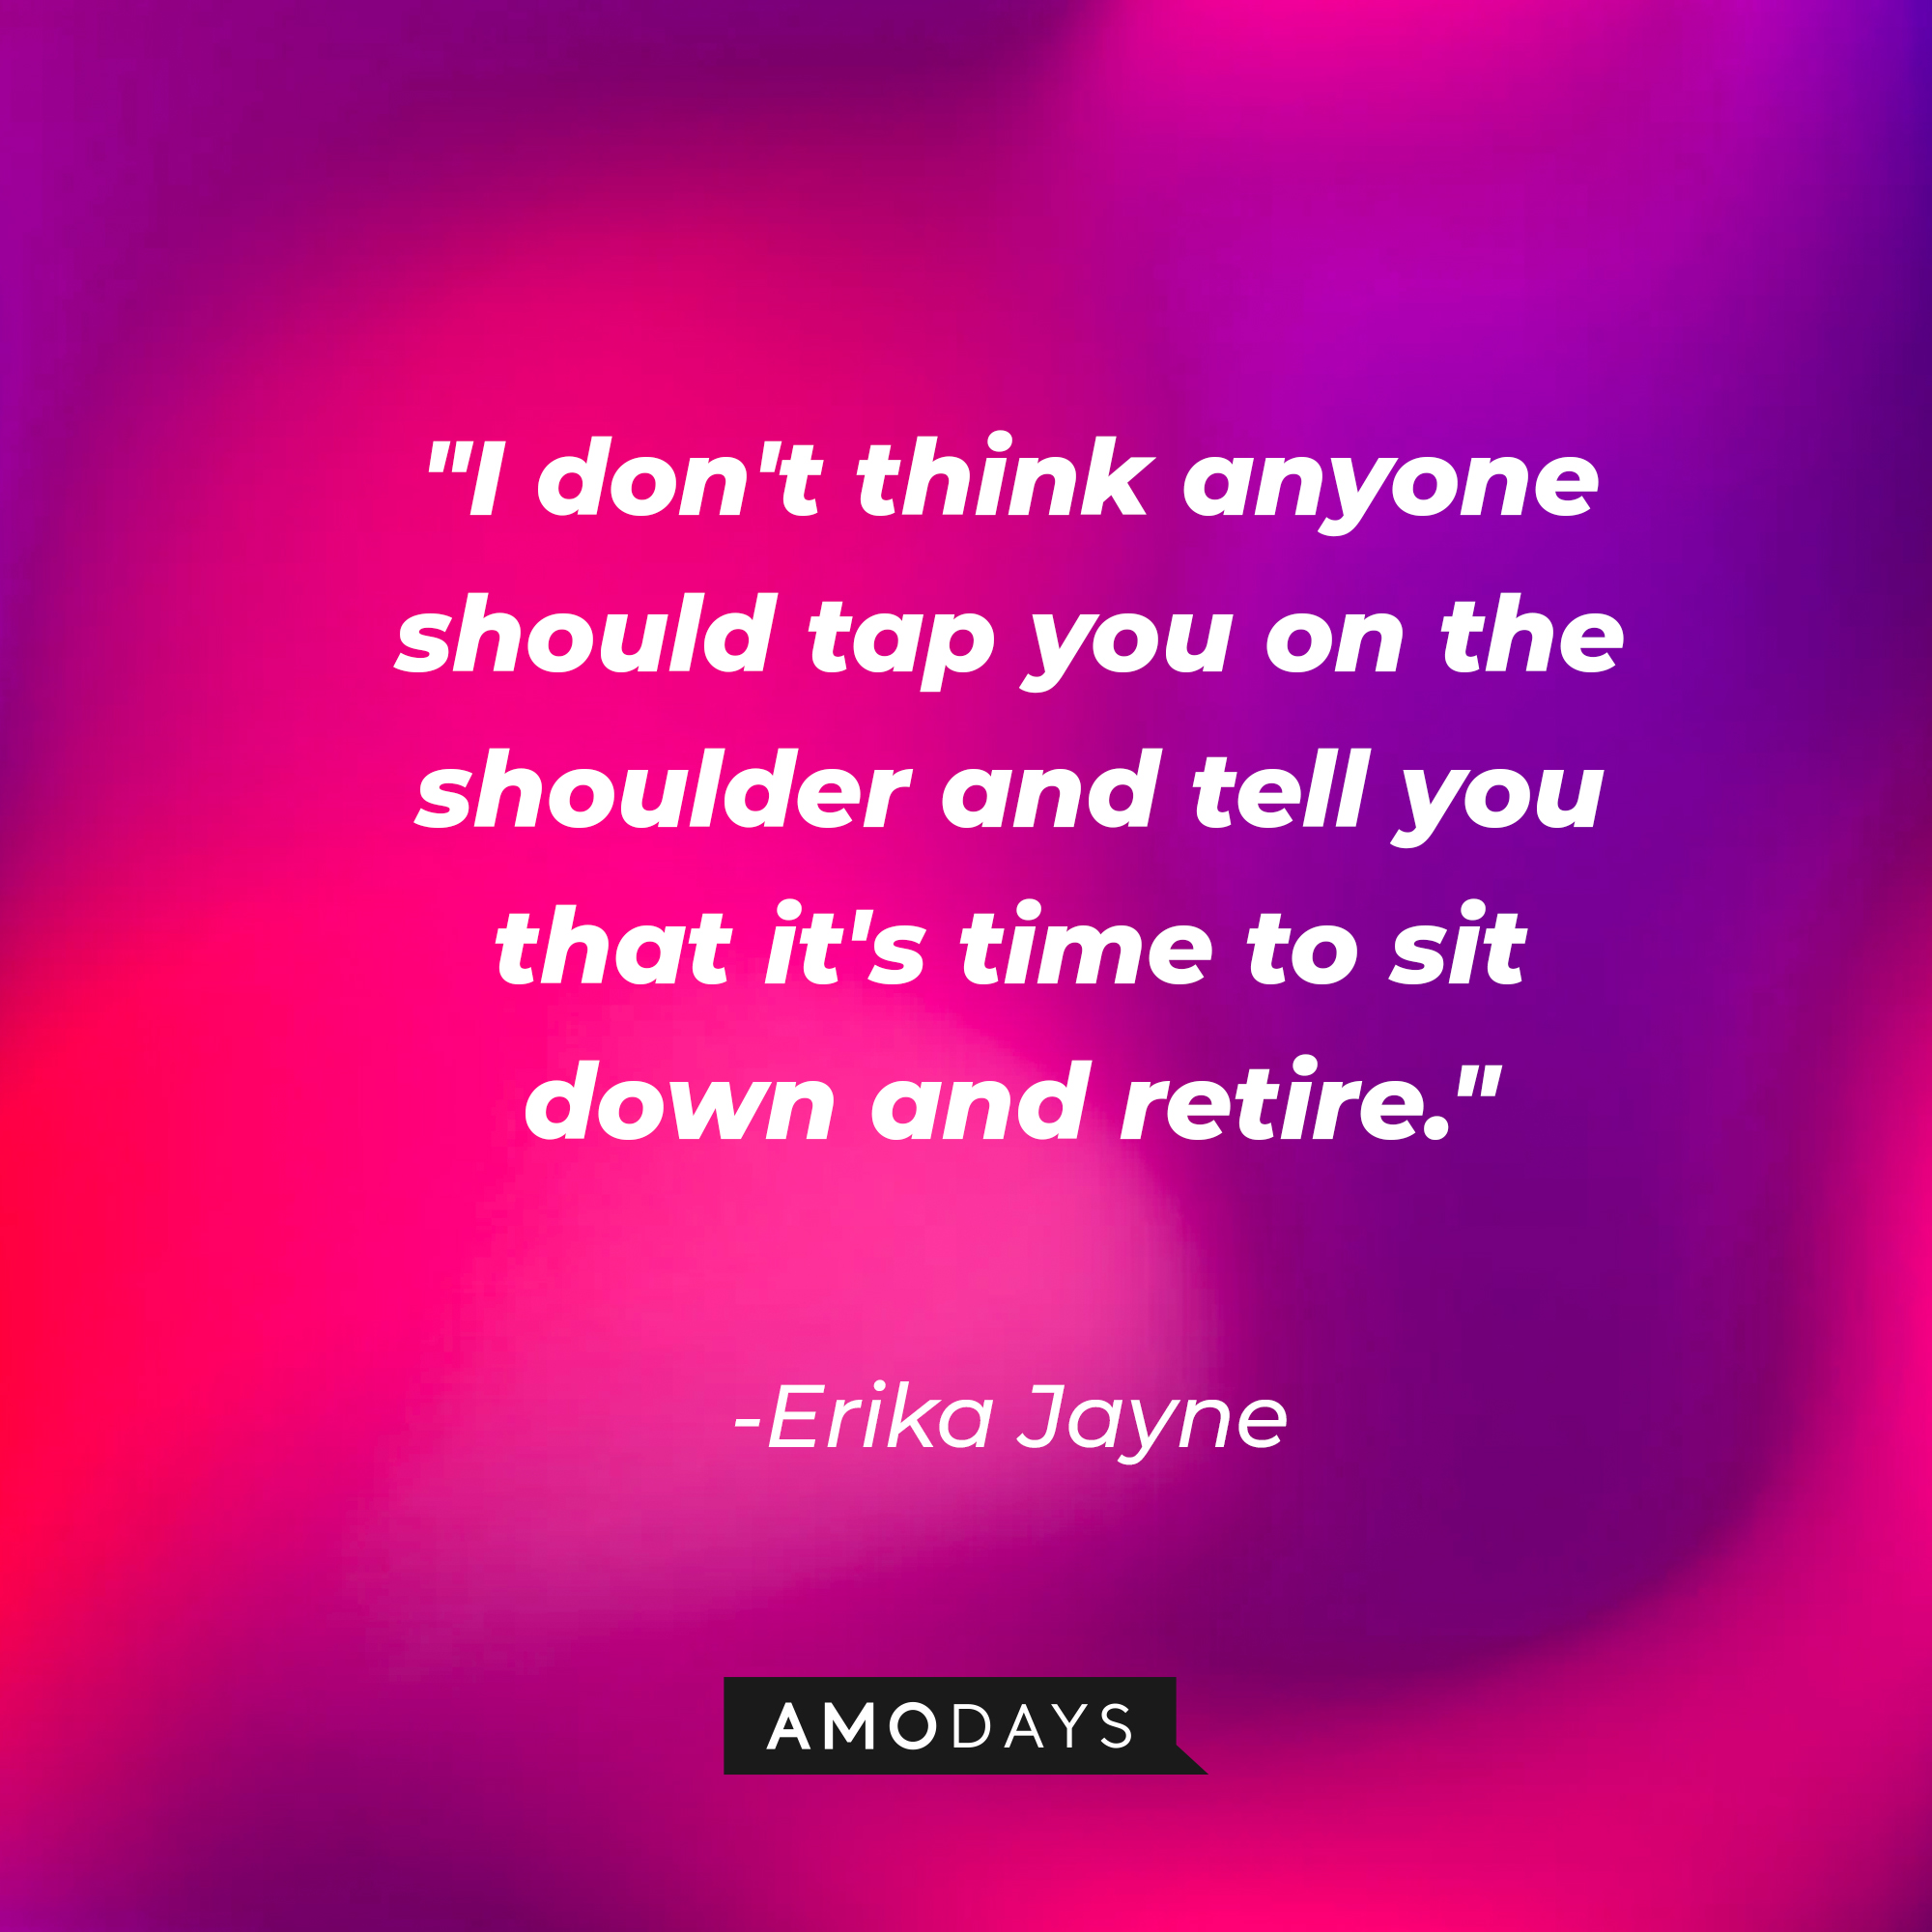 Erika Jayne’s quote: "I don't think anyone should tap you on the shoulder and tell you that it's time to sit down and retire." | Image: Amodays